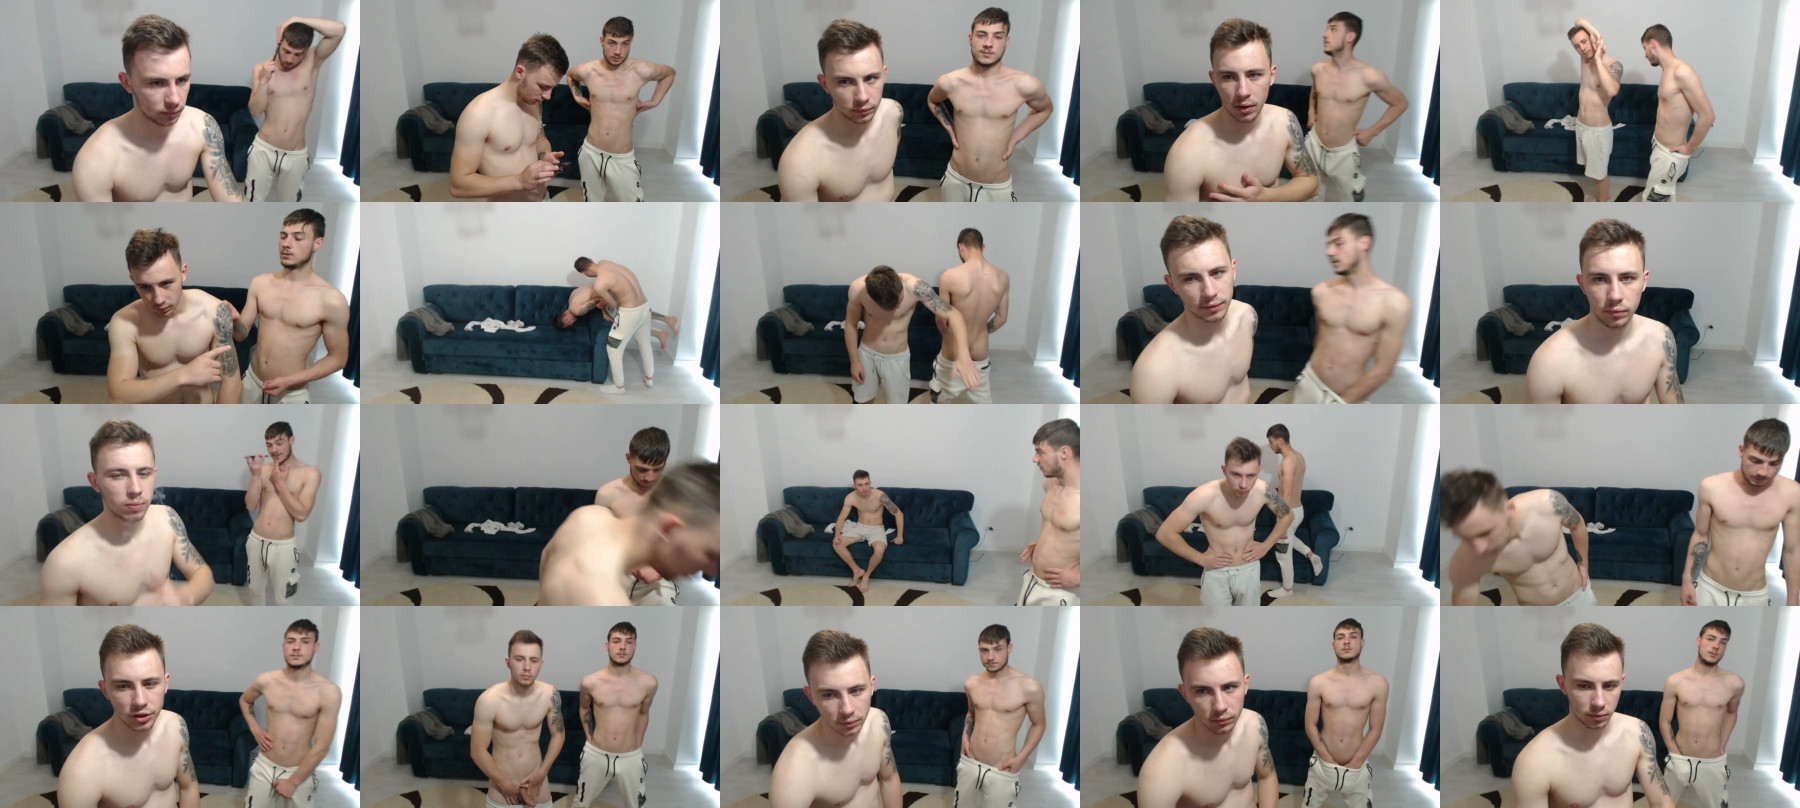 Brityboyss Download CAM SHOW @ Chaturbate 25-04-2021